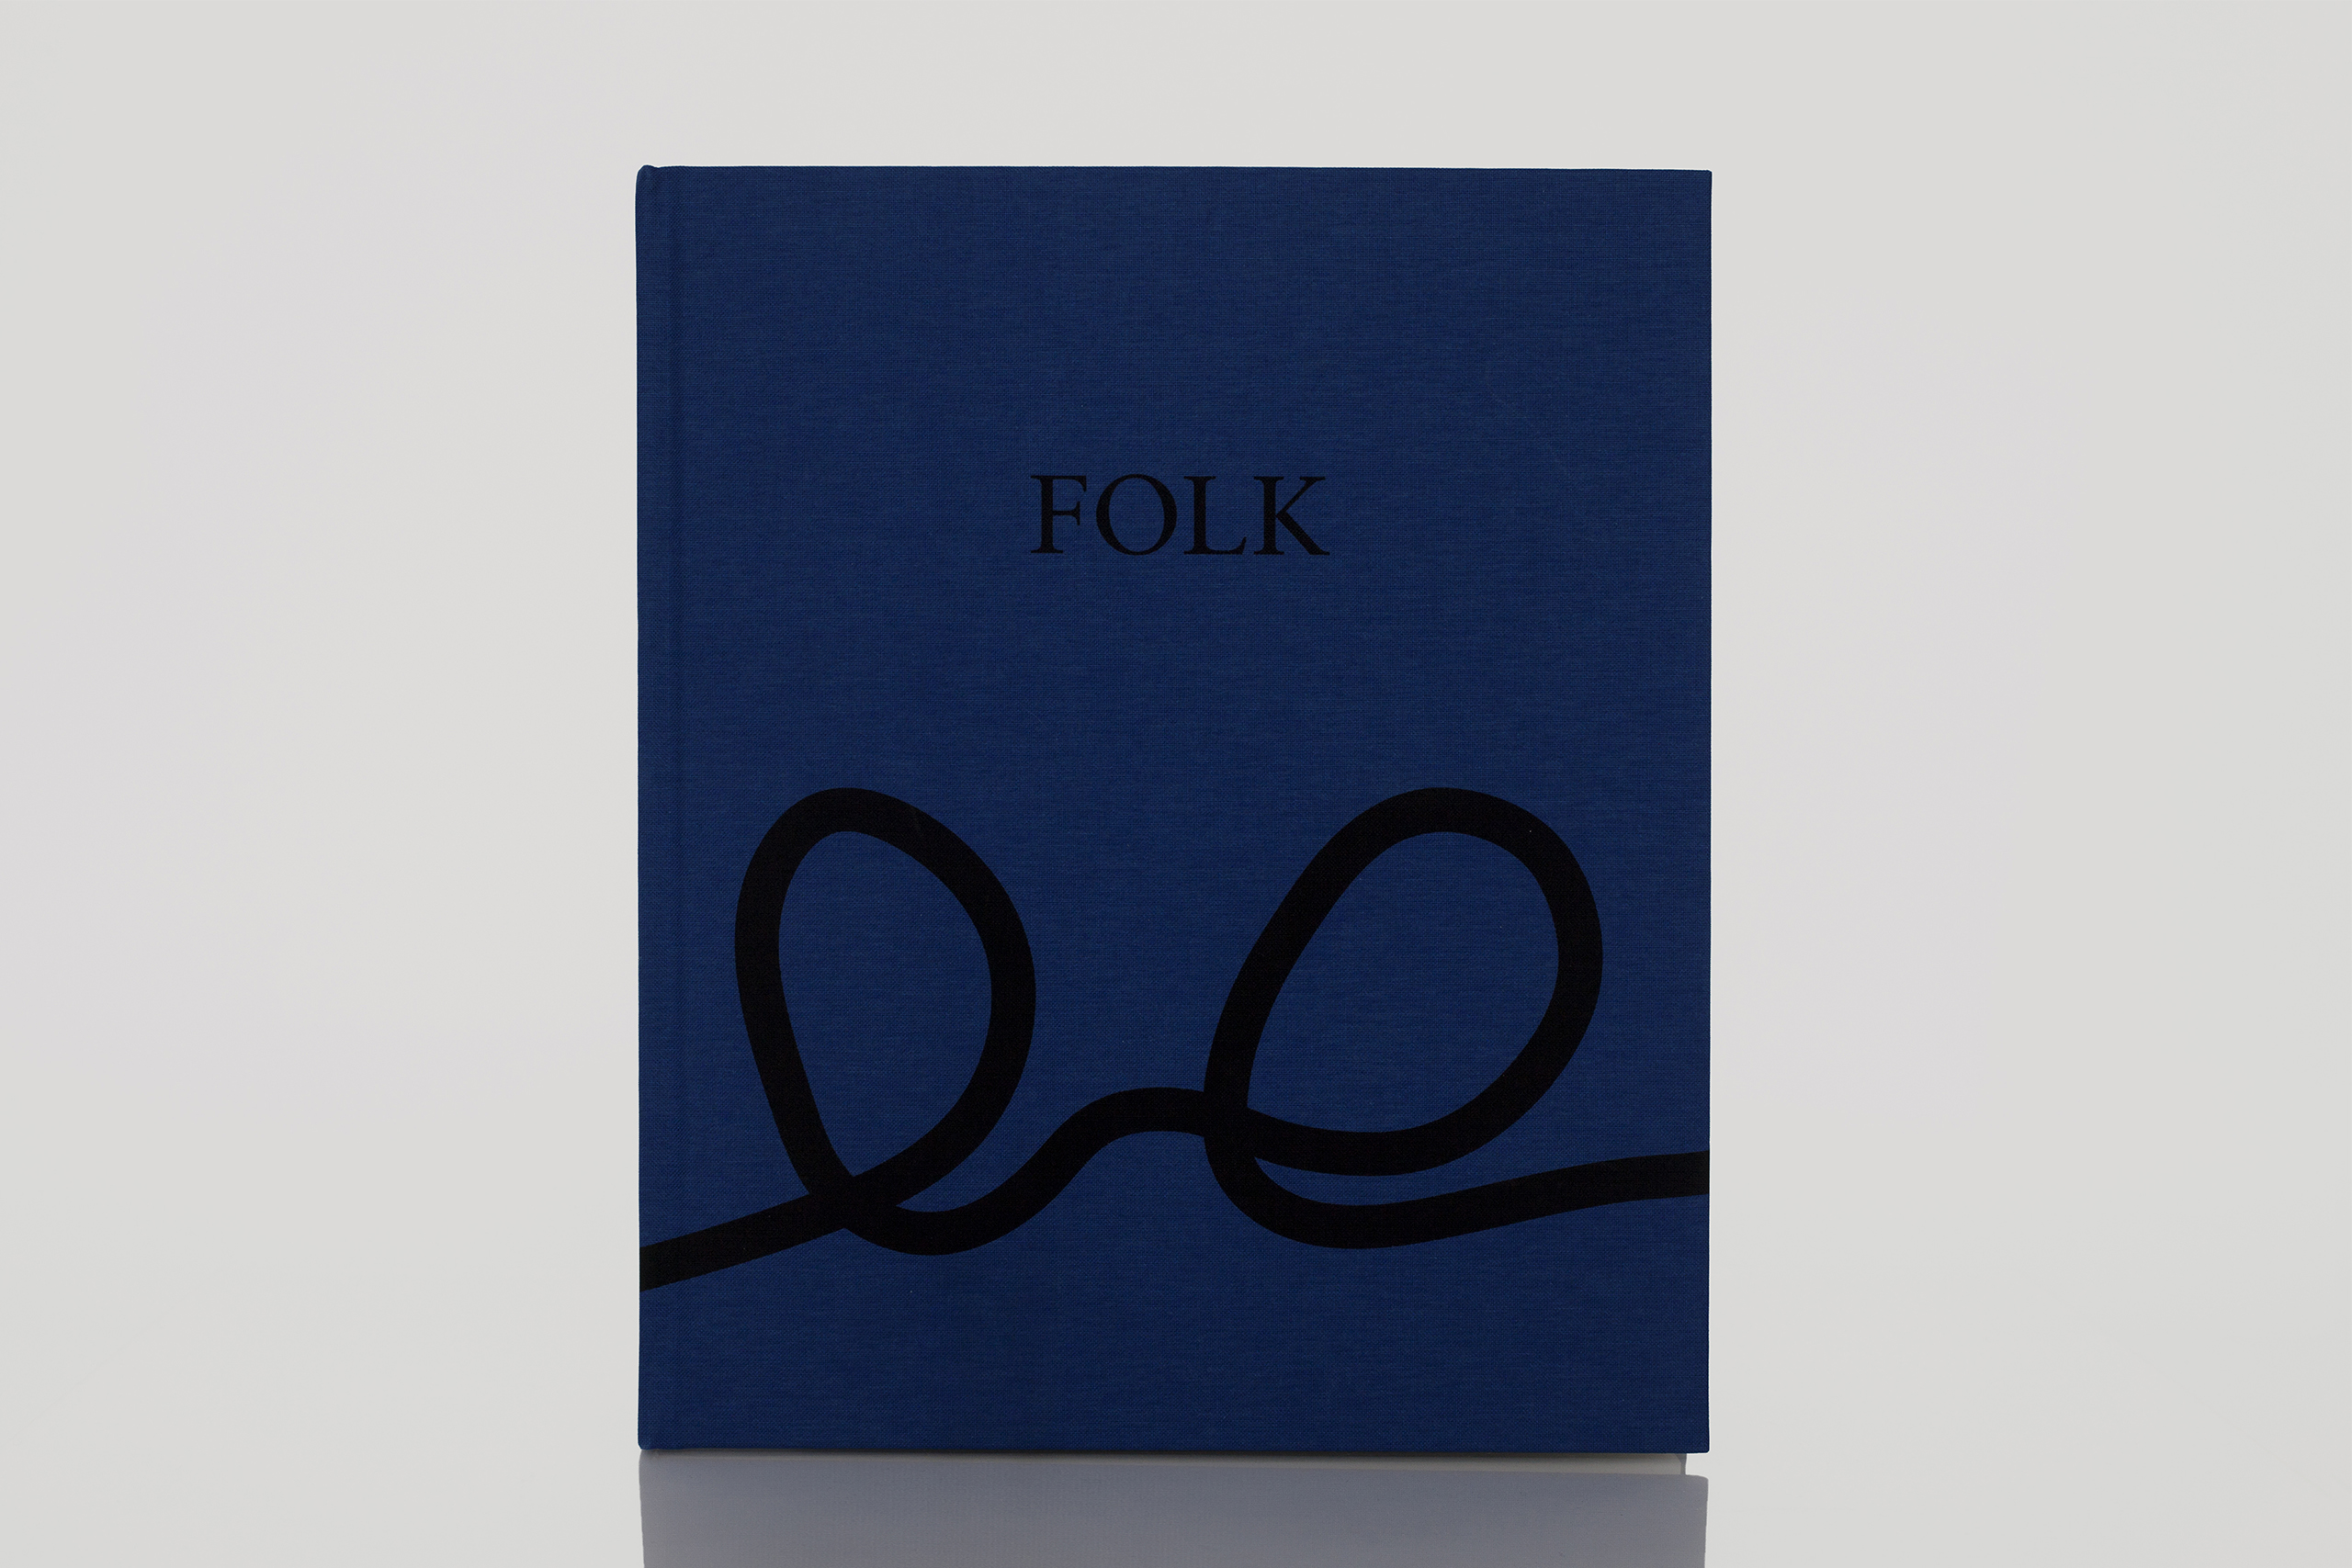 Folk by Aaron SchumanPublished by NB